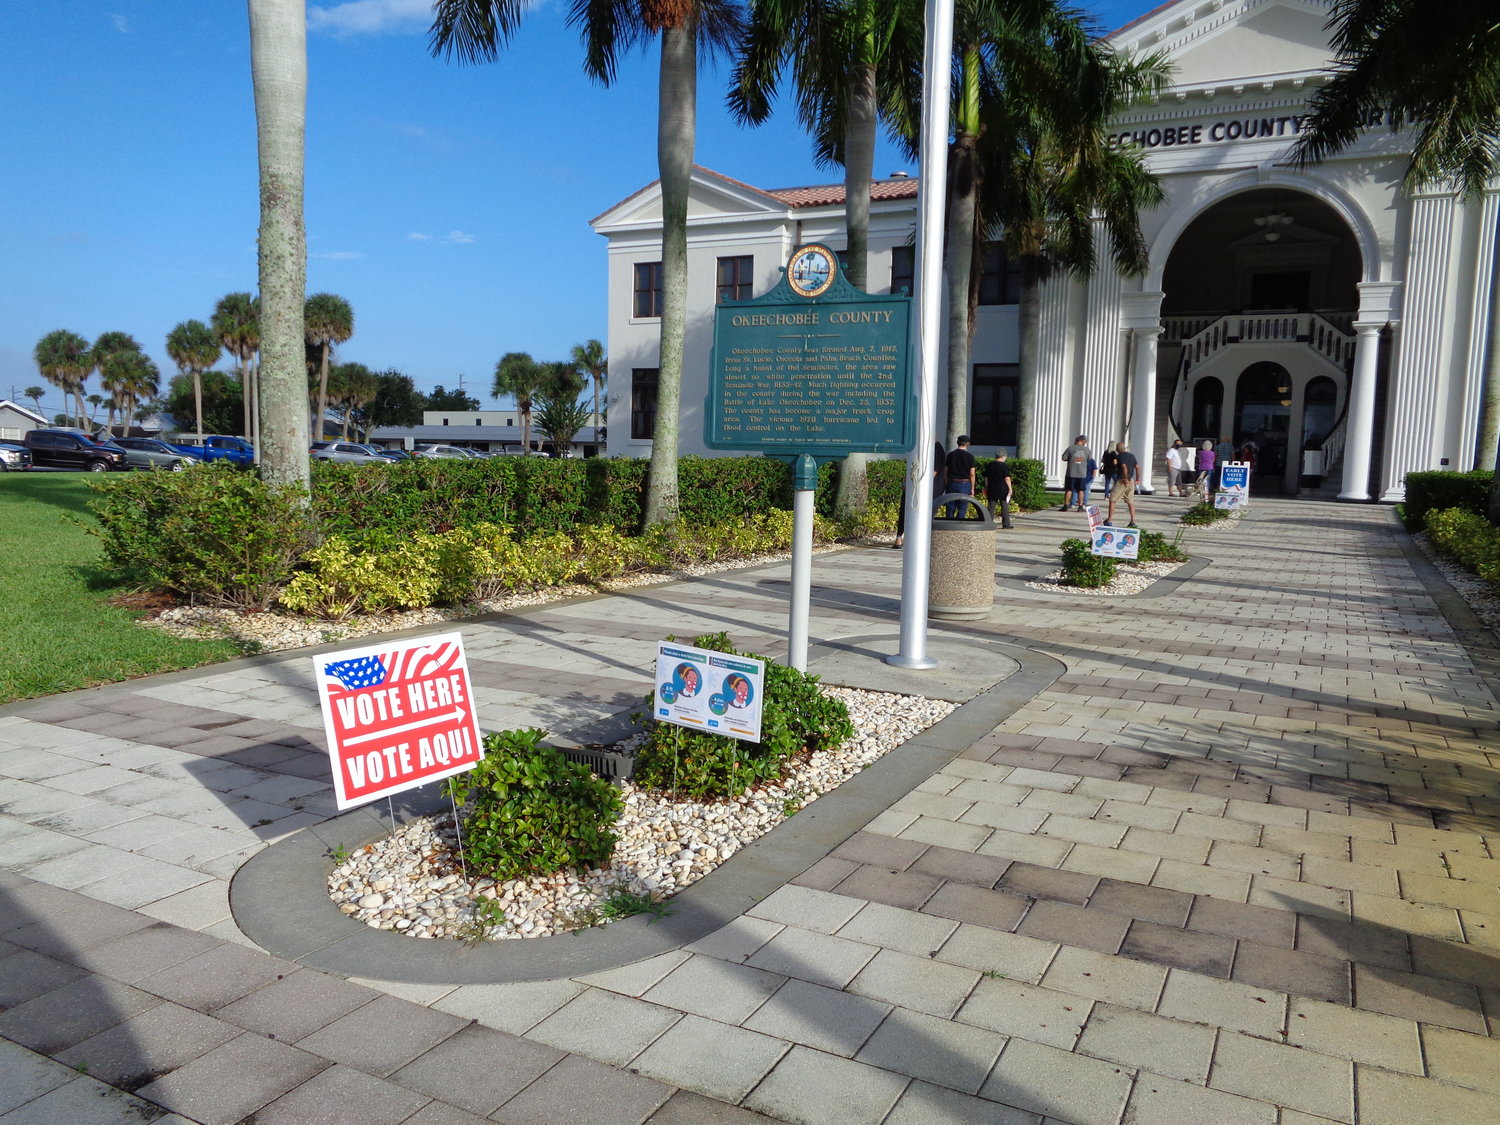 Early voting in Okeechobee started Monday at the Historic Okeechobee County Courthouse.